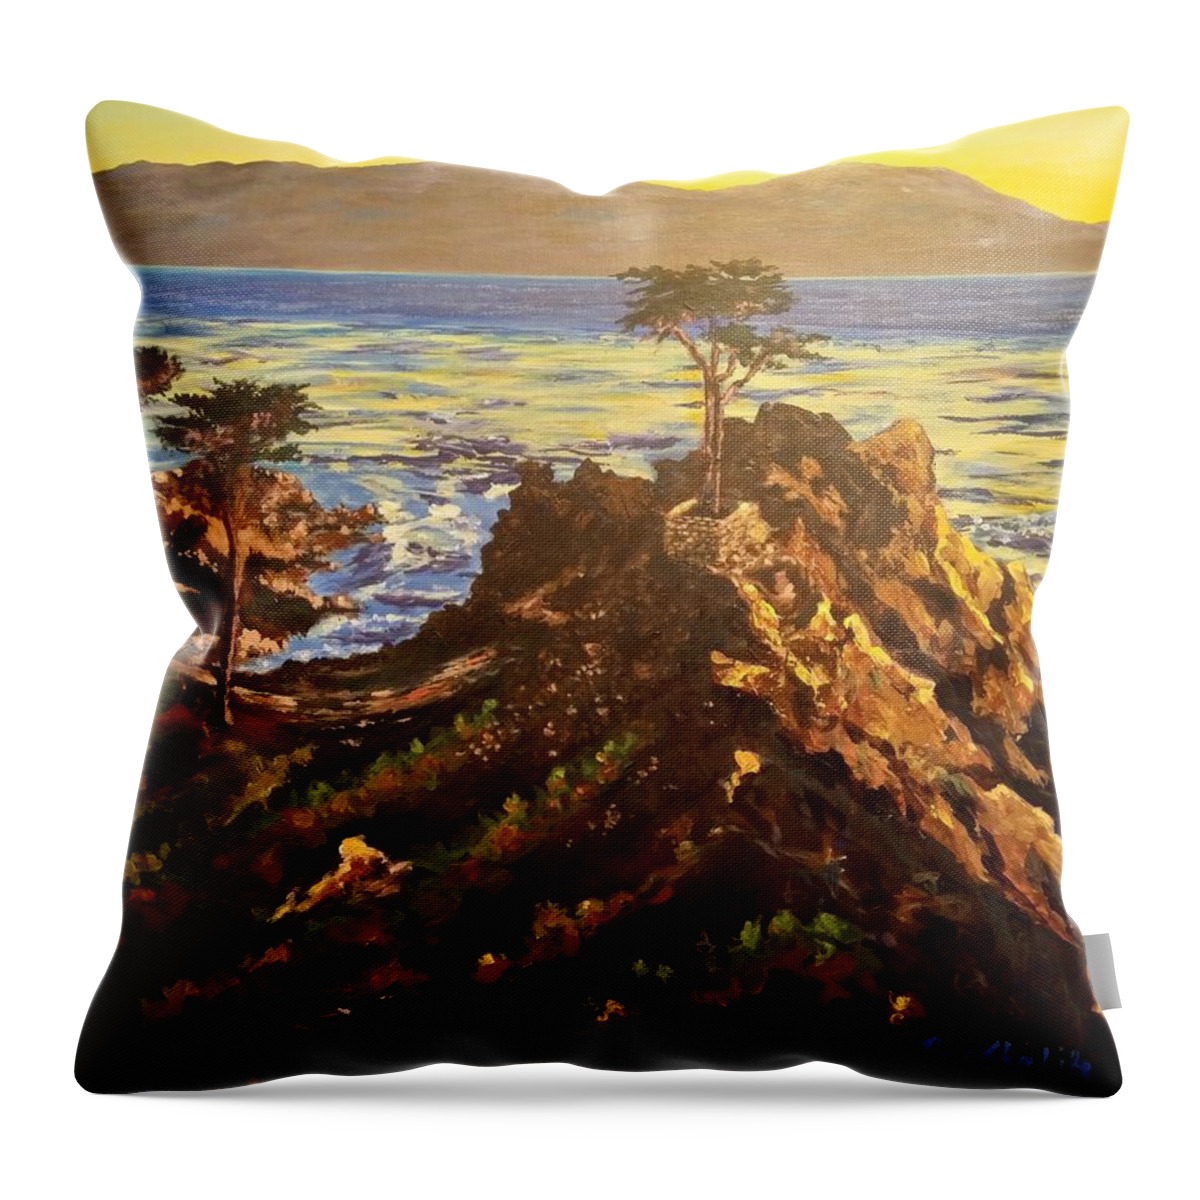 Glorious Throw Pillow featuring the painting Glorious sunset by Ray Khalife